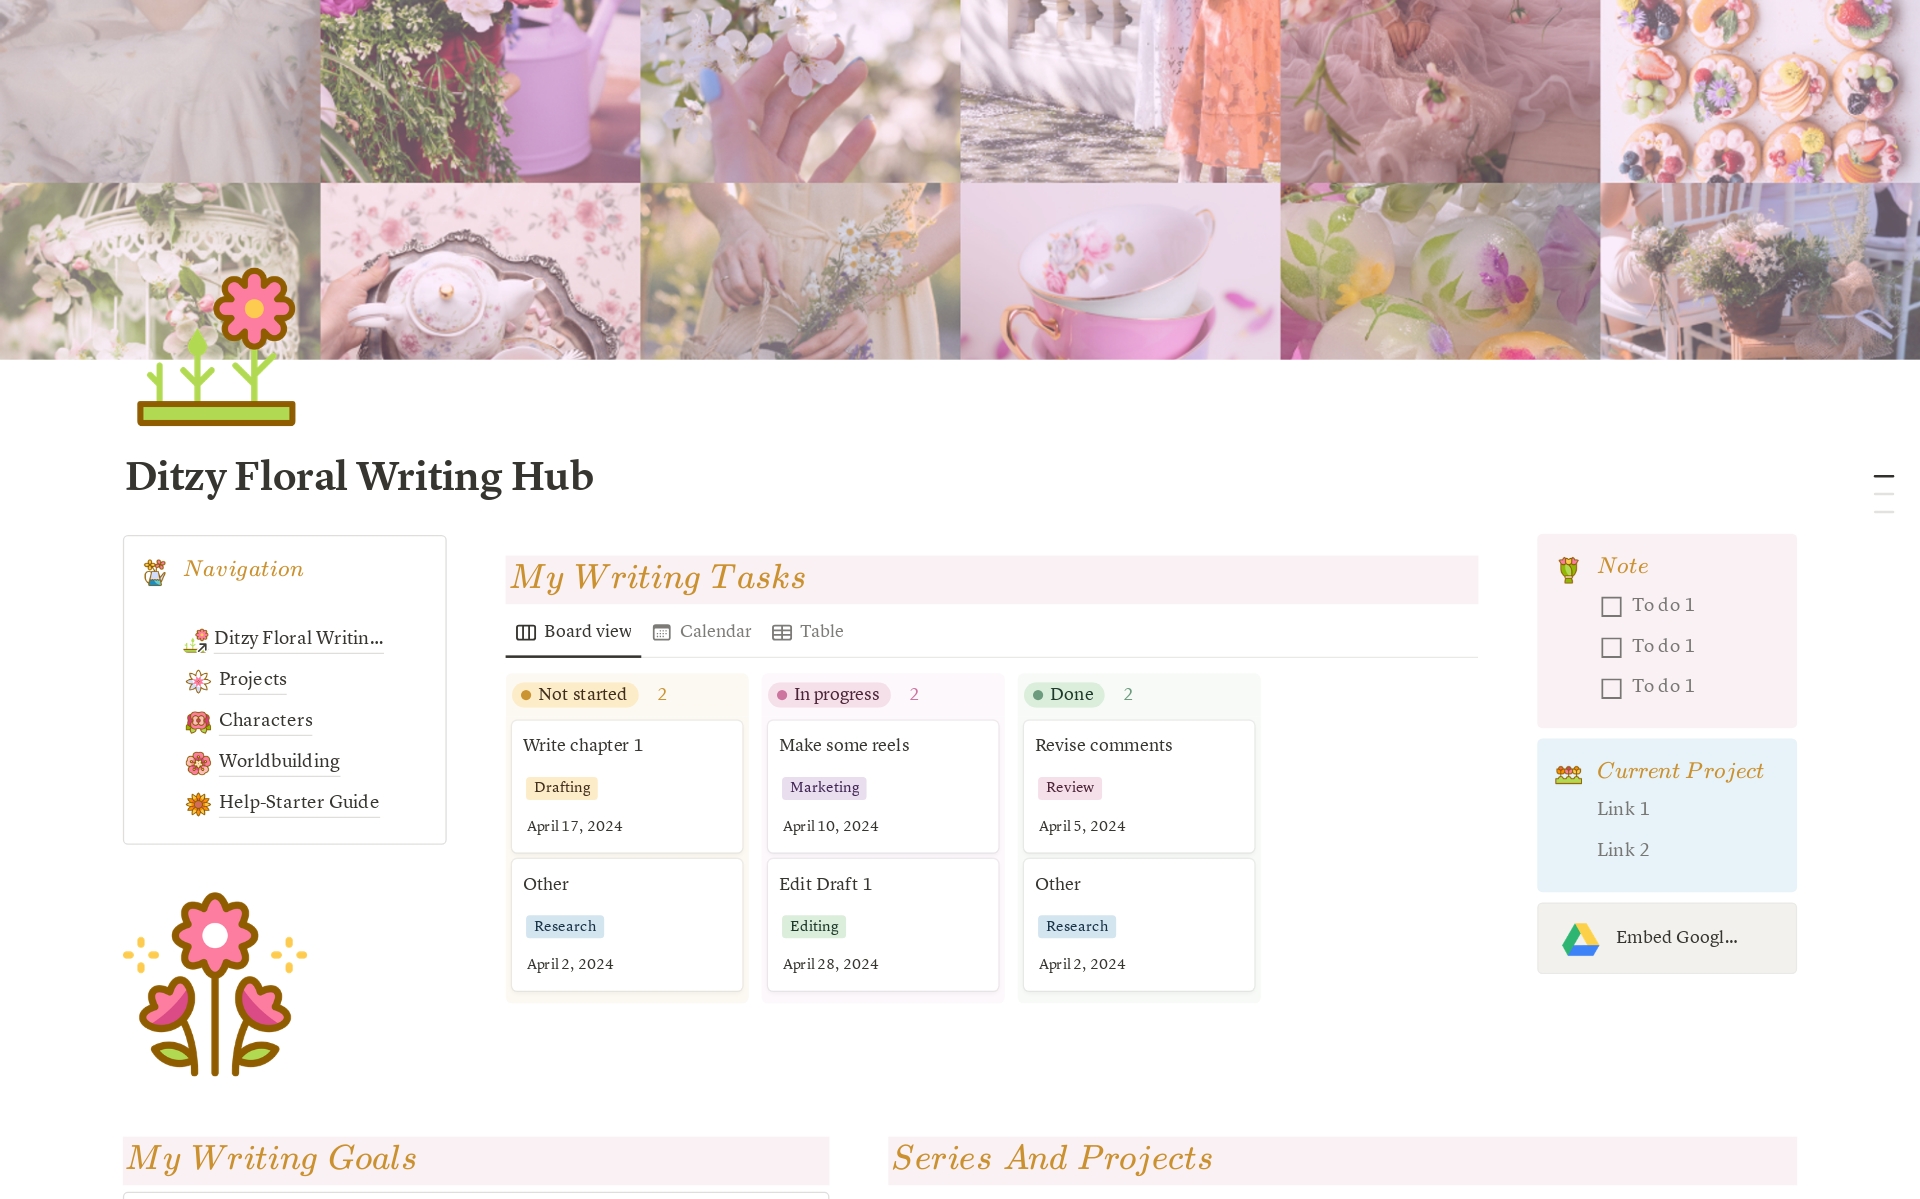 🌟The Writing Hub is ideal for novel writers who love writing aesthetically and visualizing their projects.
✨ Scrivener Customization + Google Docs collaboration
📒 Project tracker + Character sheets + Worldbuilding Wiki + Time/Word counter & more
💛Made by a writer for writers